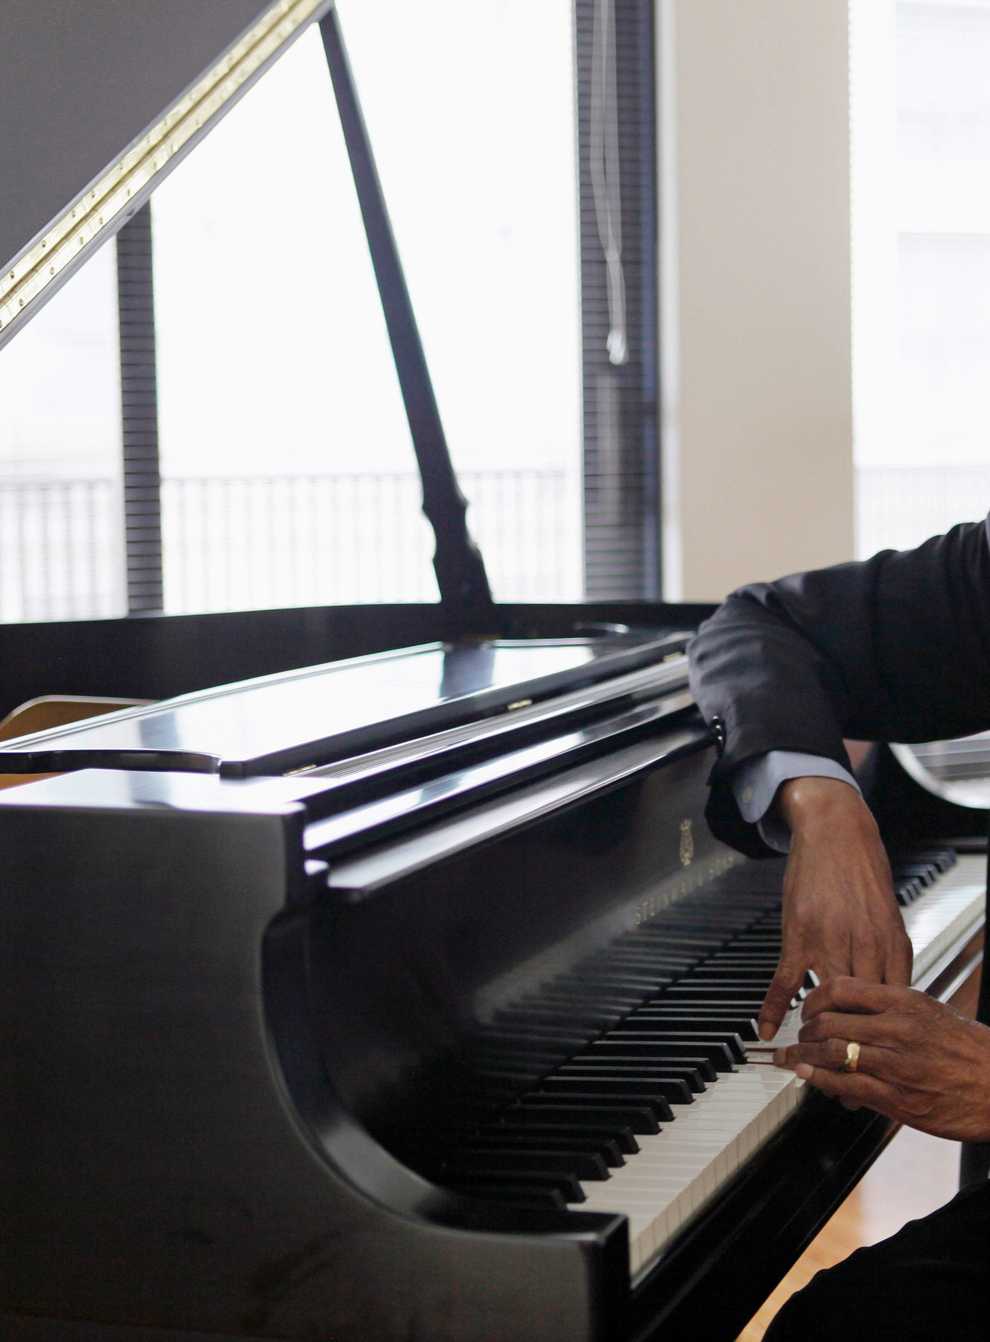 Jazz pianist and composer Ramsey Lewis (AP)